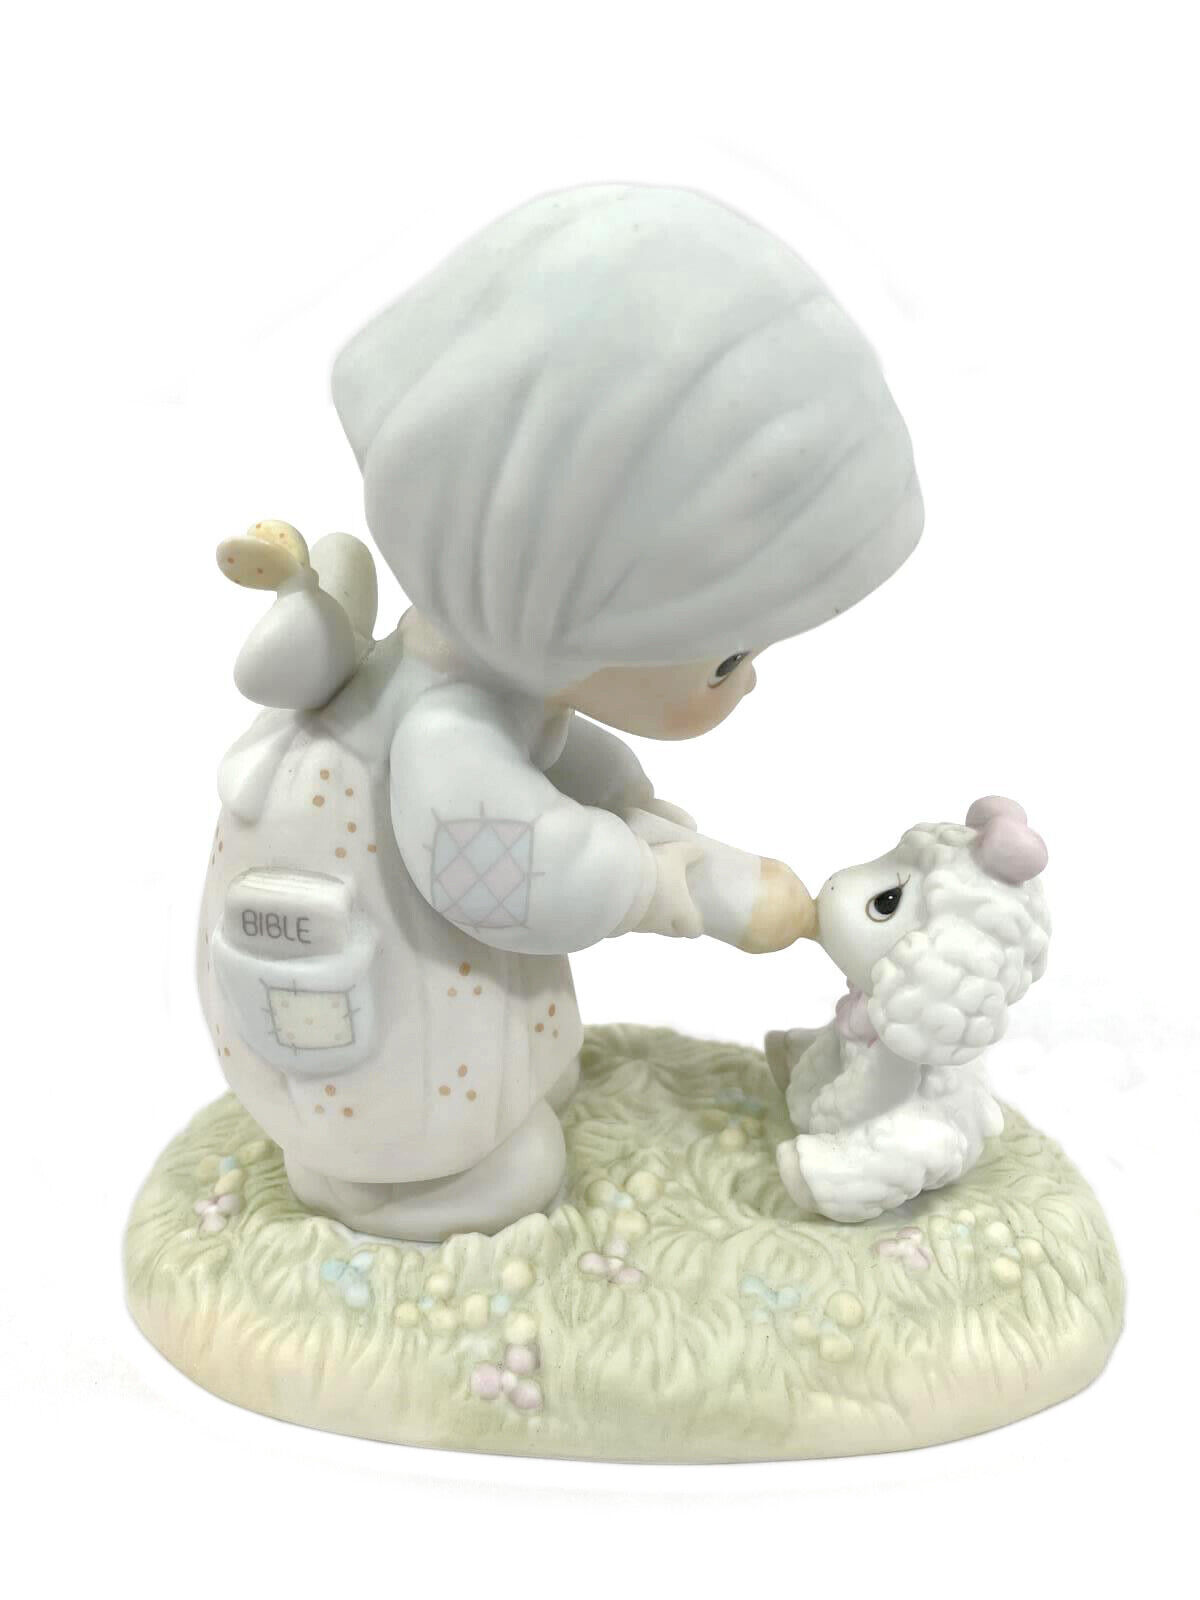 1987 Enesco Precious Moments Members Only Figurine Feed My Sheep PM-871